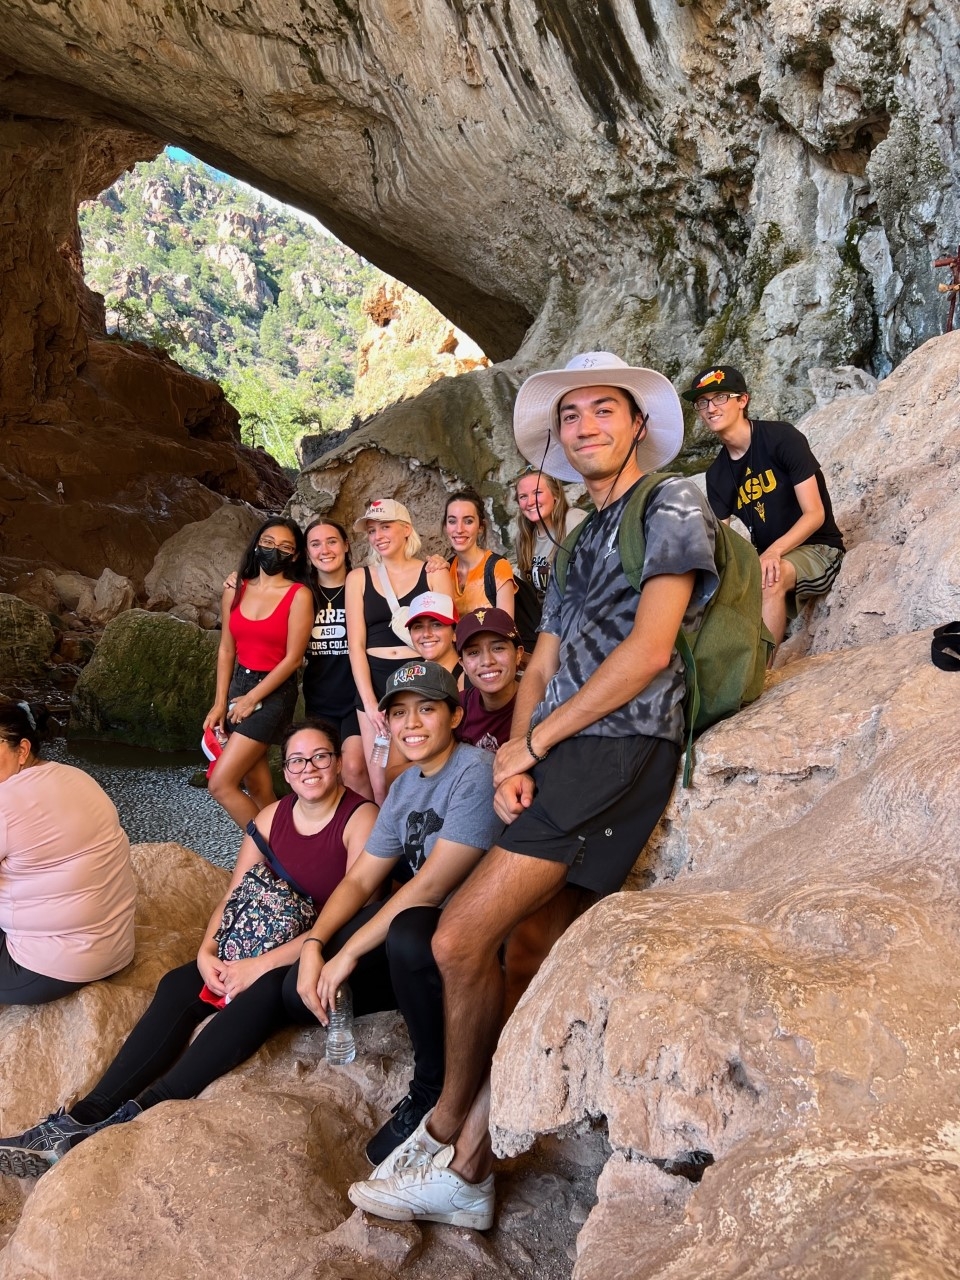 Group of students gathered on a rick formation, posing for a photo with a park ranger.